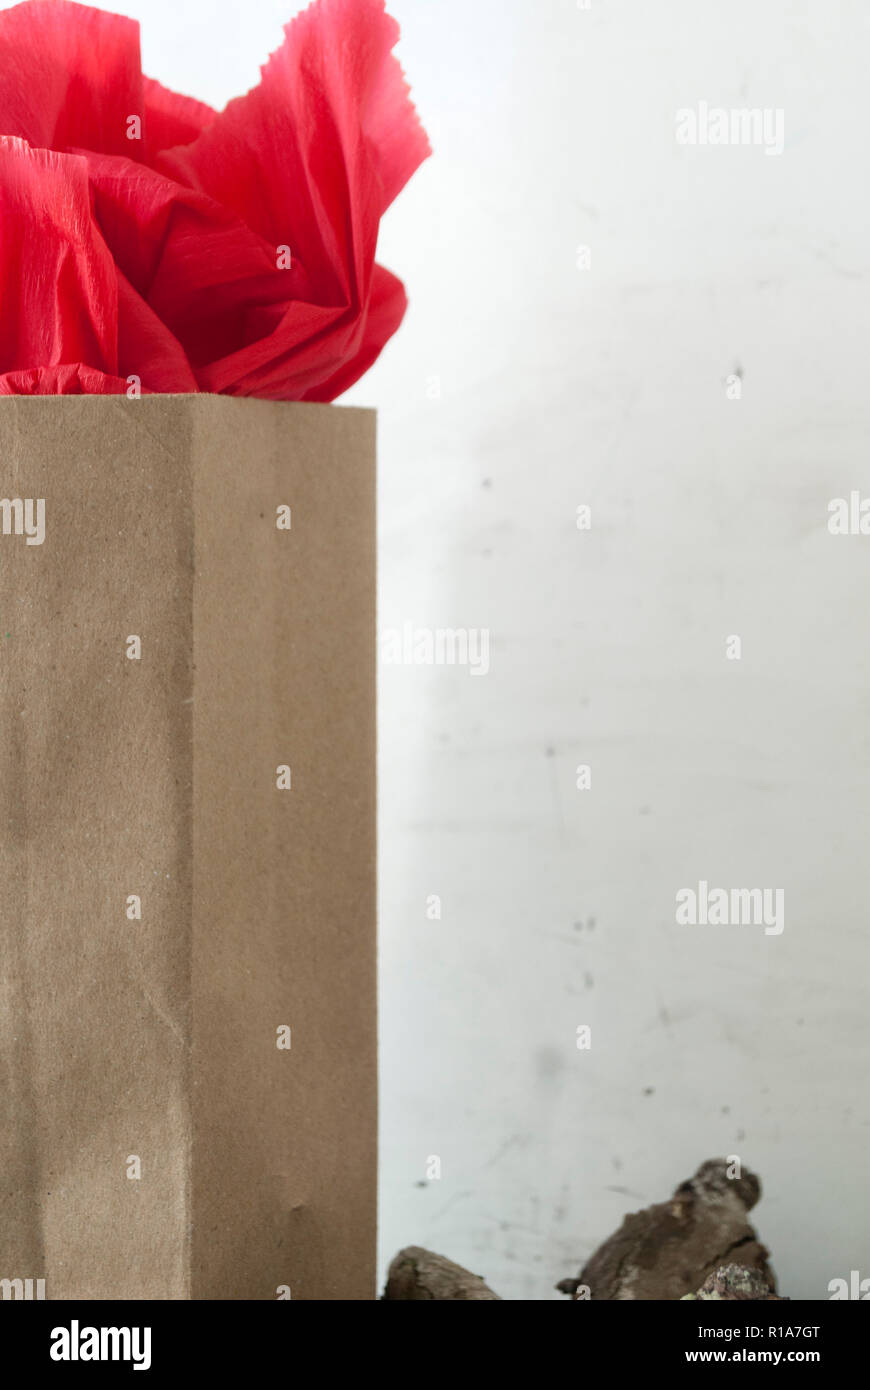 background of red gift paper bag detail with white background Stock Photo